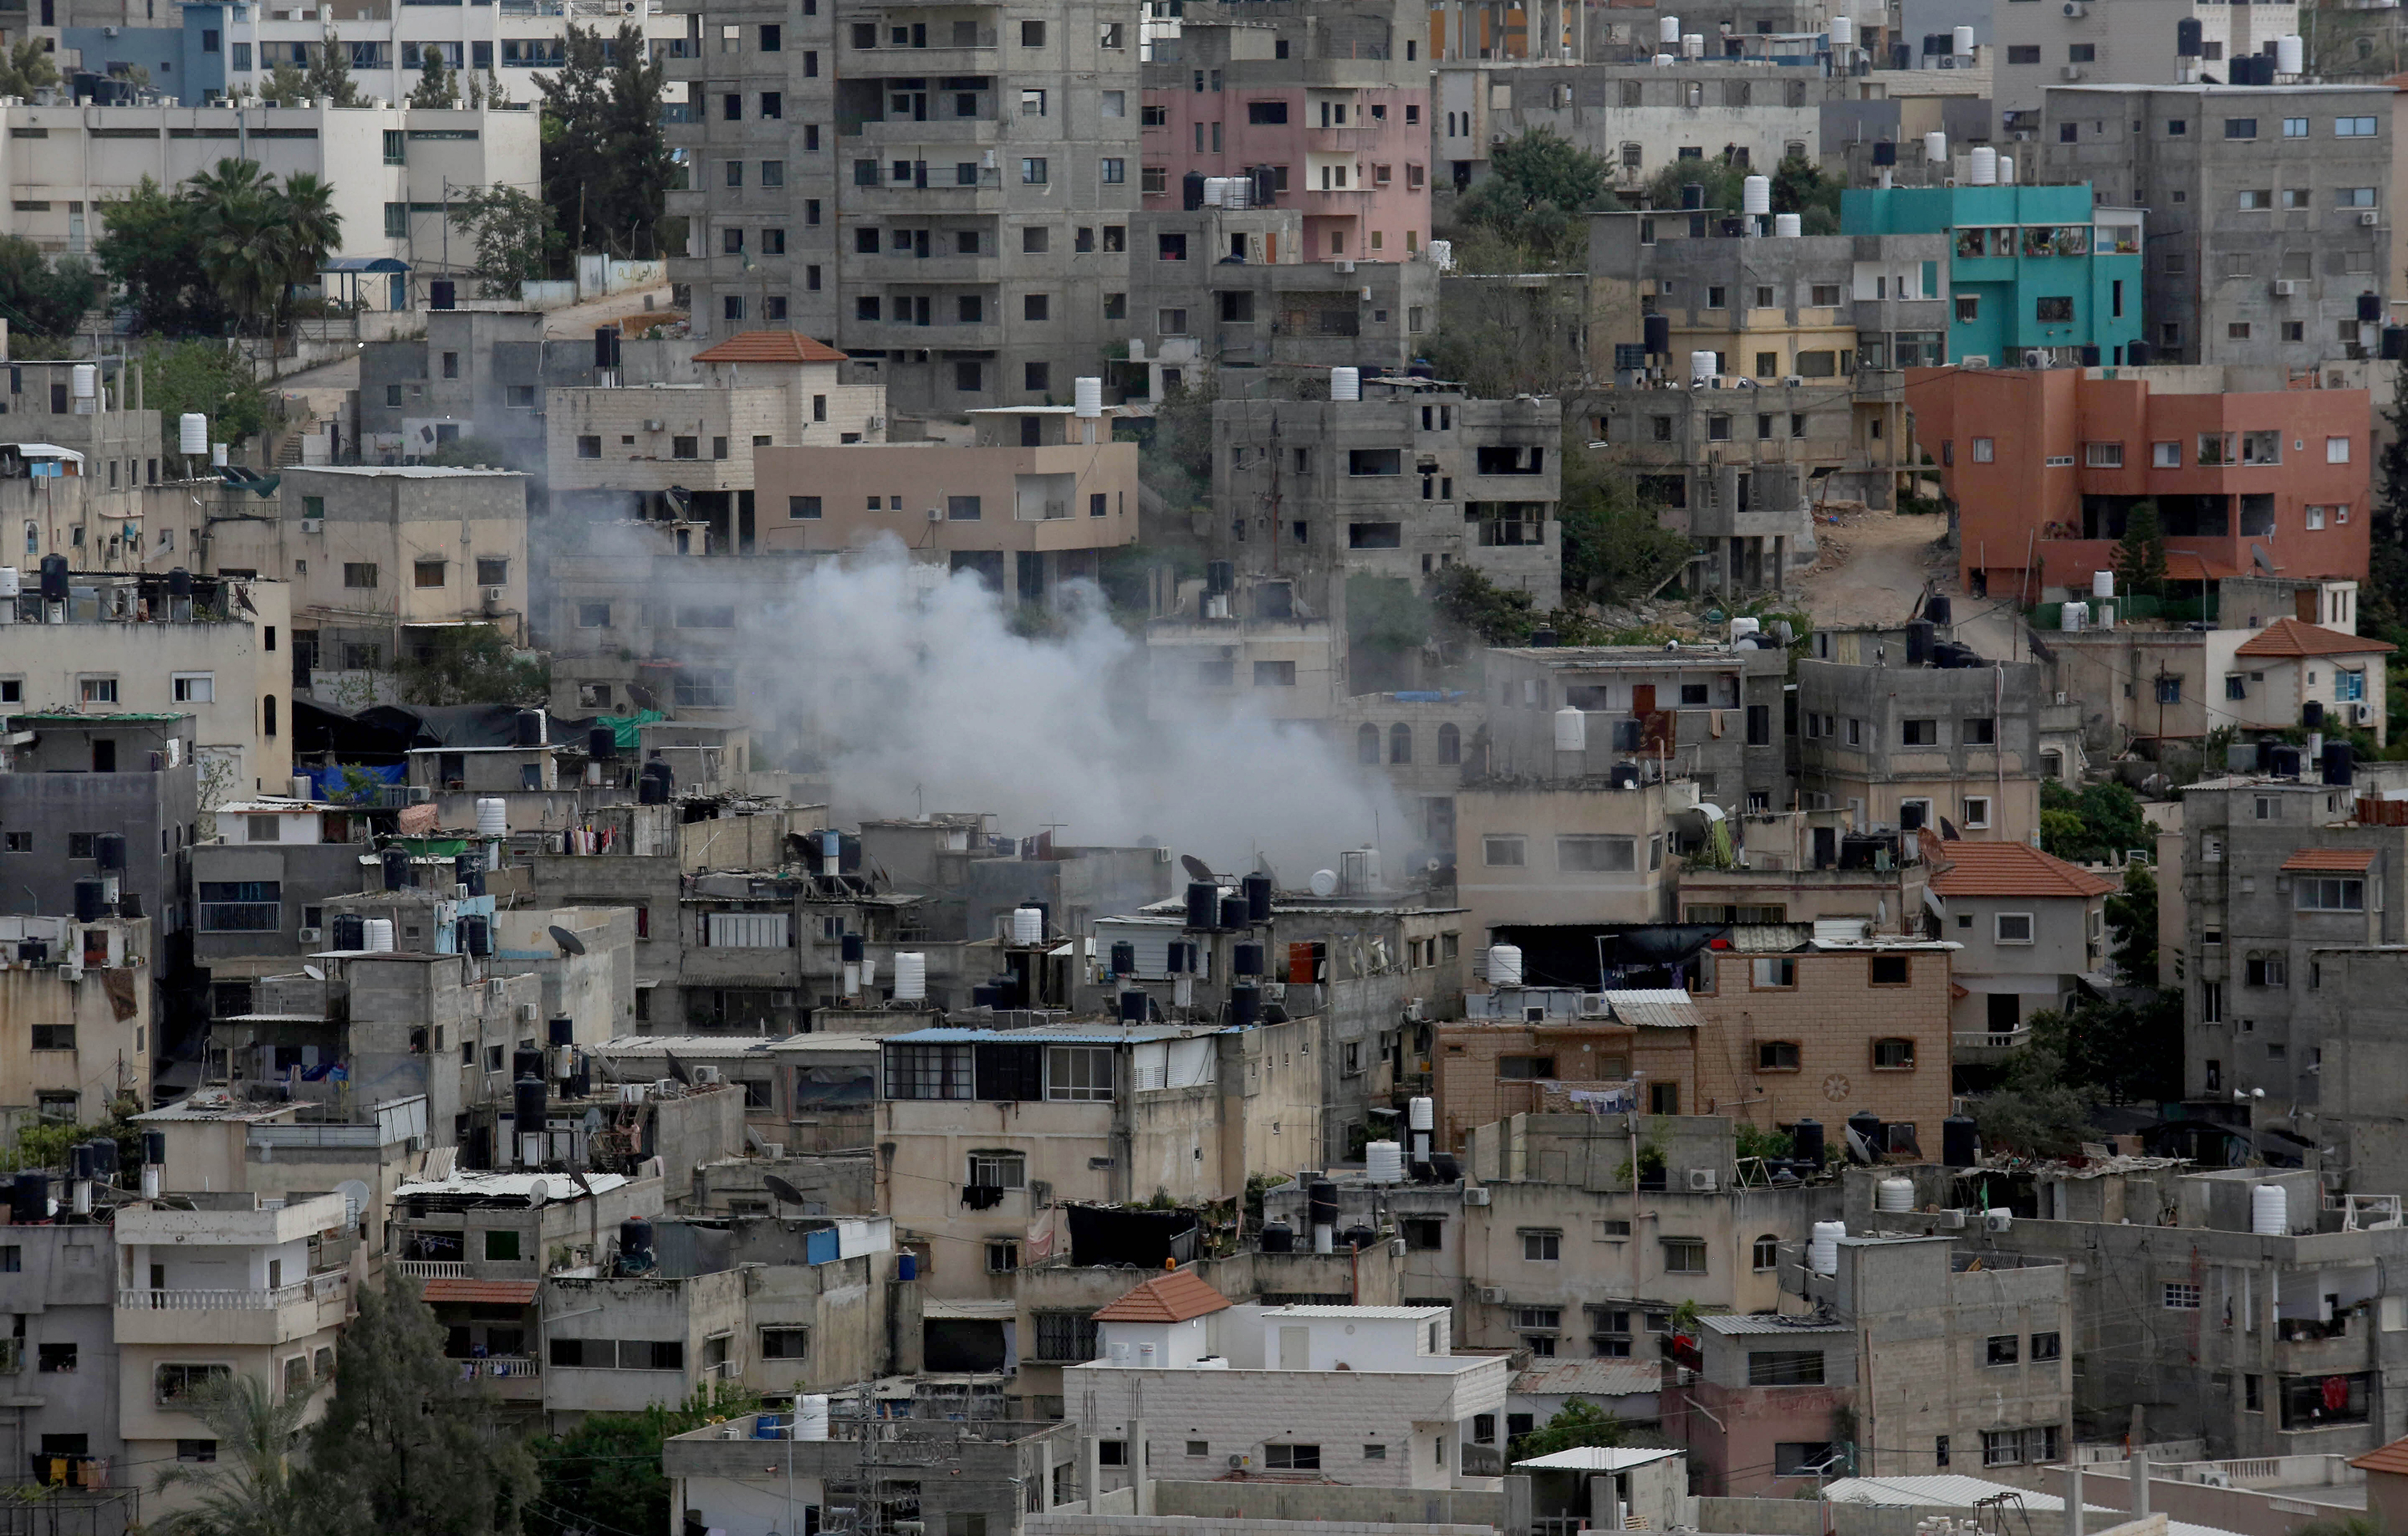 View of buildings in Tulkarm, West Bank, 19 April.  (Credit: Nedal Eshtaiyah/Anadolu/Getty Images)